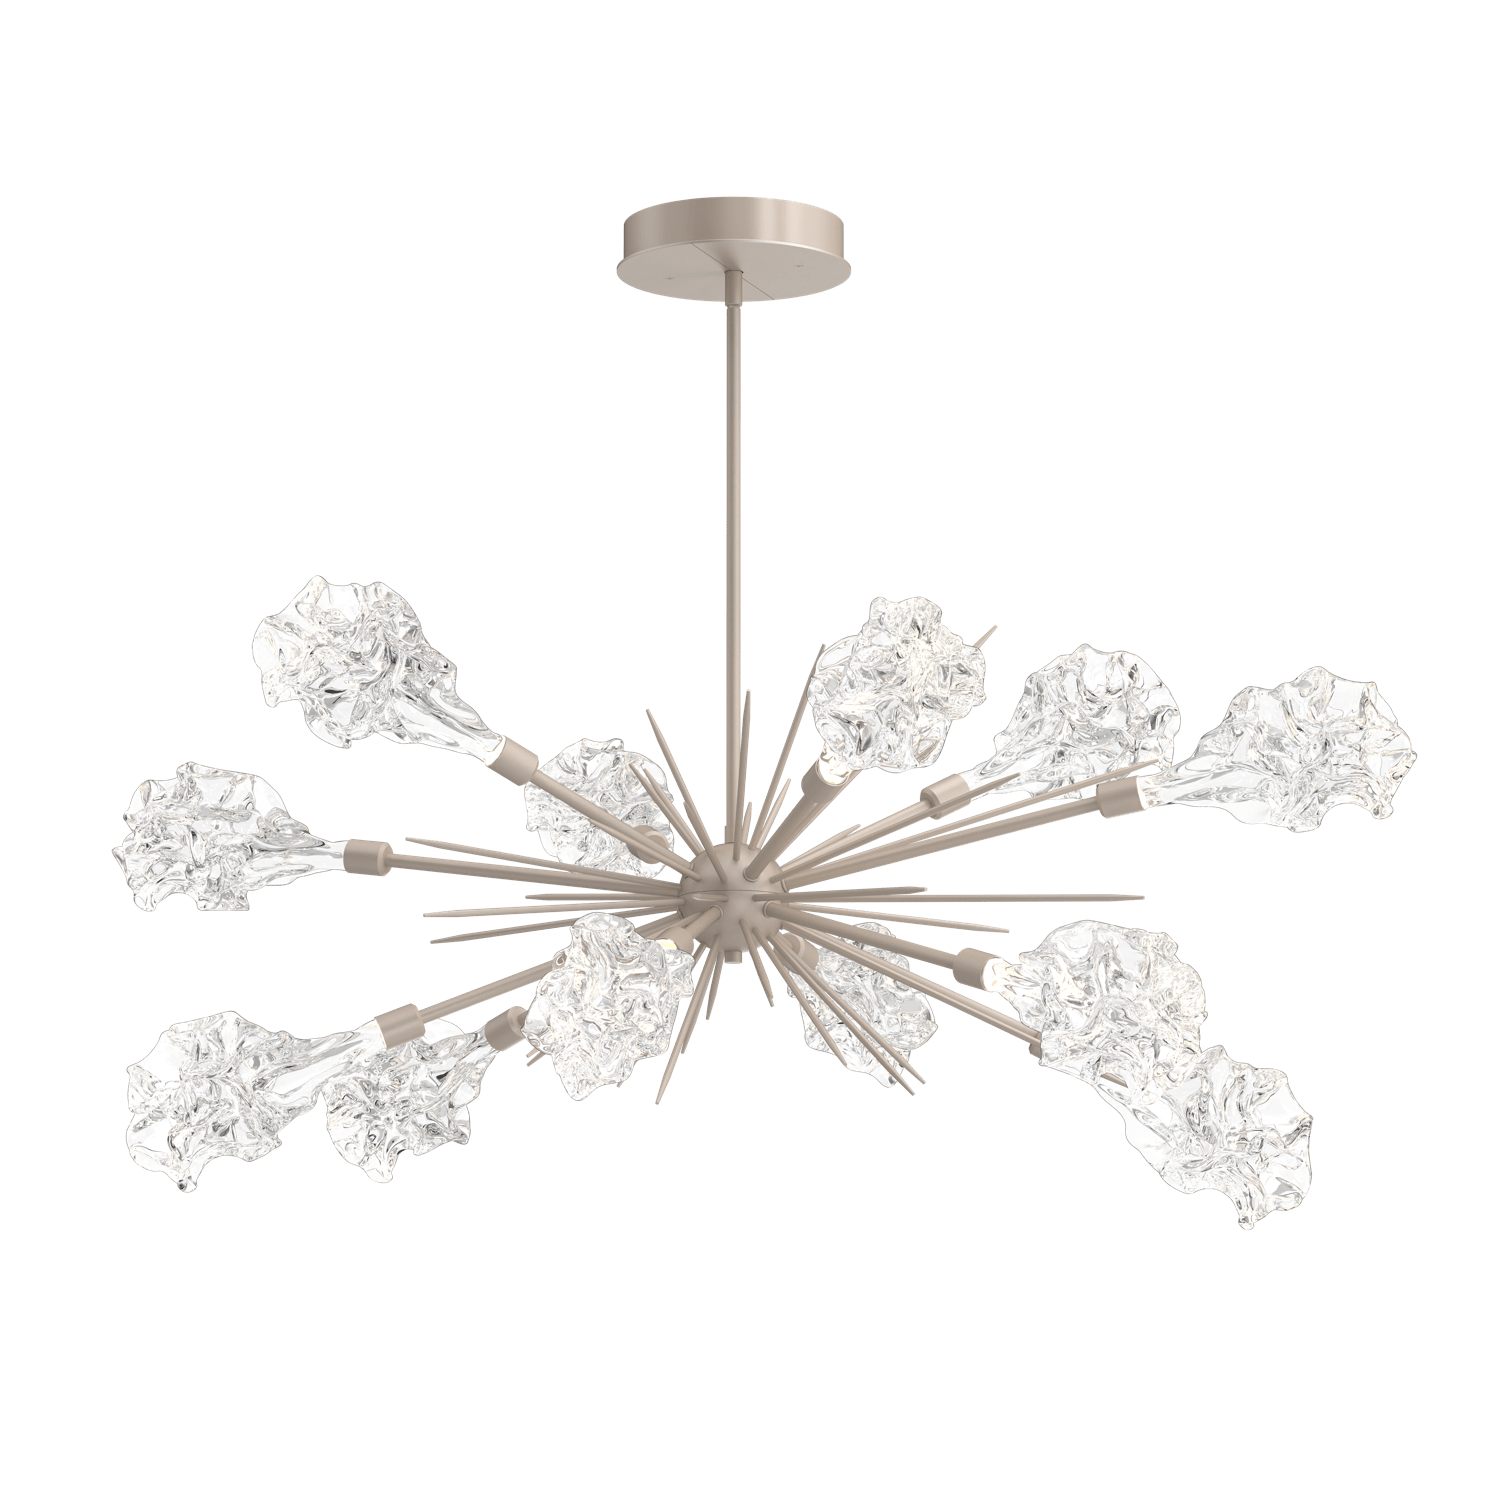 PLB0059-0A-BS-Hammerton-Studio-Blossom-47-inch-oval-starburst-chandelier-with-metallic-beige-silver-finish-and-clear-handblown-crystal-glass-shades-and-LED-lamping